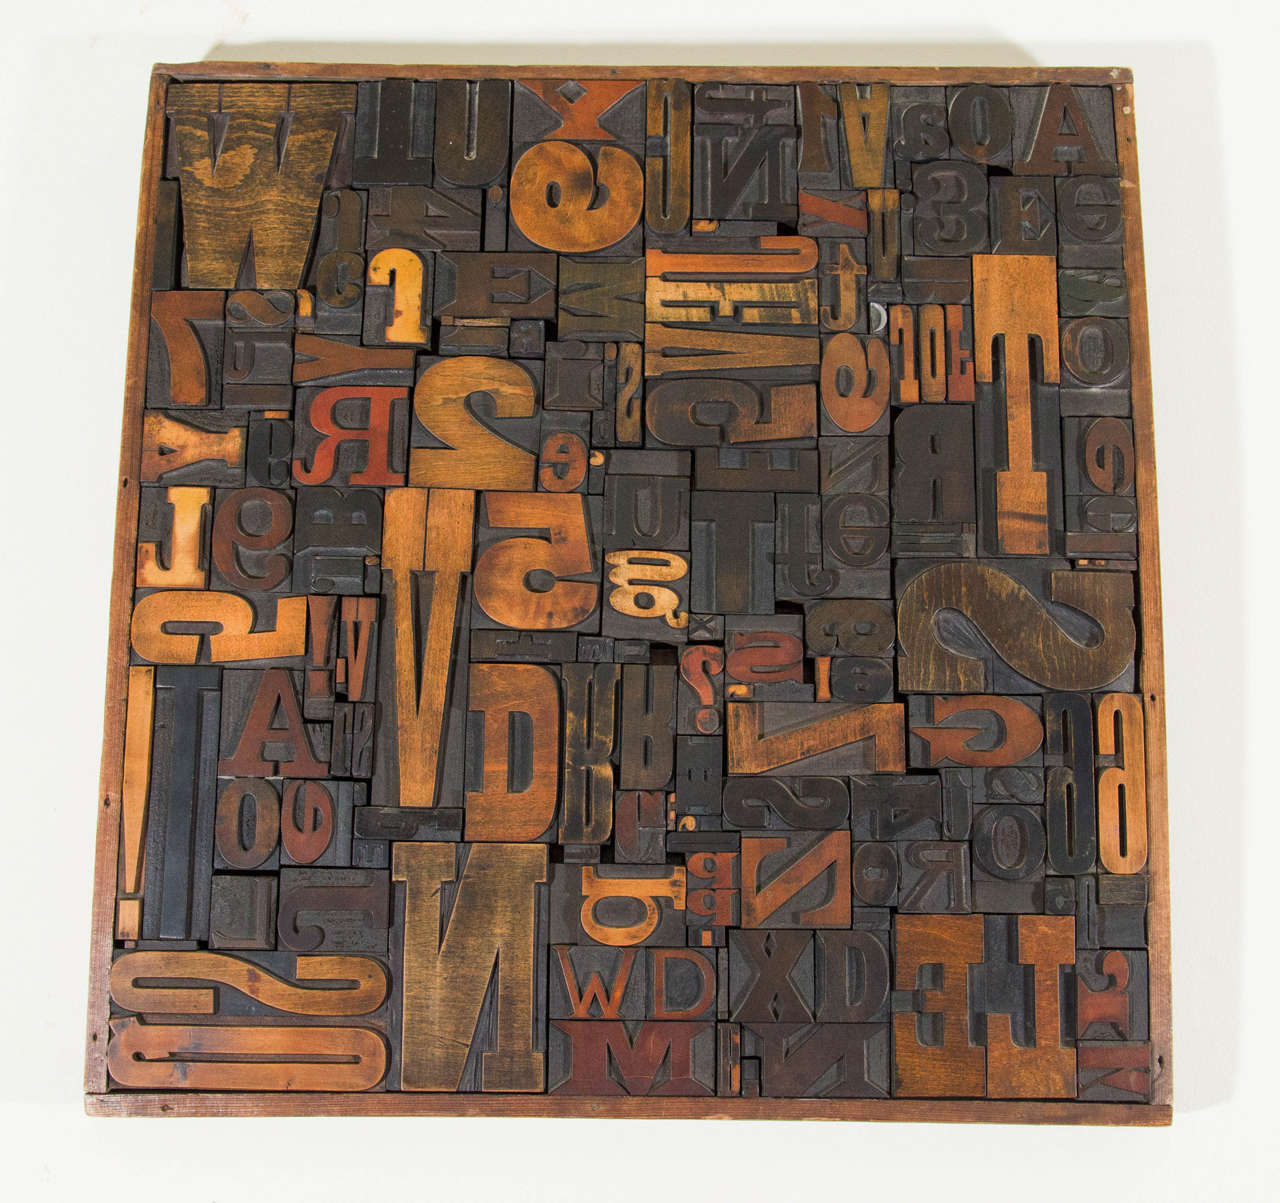 A vintage wall sculpture composed of letterpress printing blocks, produced circa 1960's - 1970's, with a variety of letters and numbers in a wooden frame. Good vintage condition with age appropriate wear. 

Second letterpress printing blocks wall